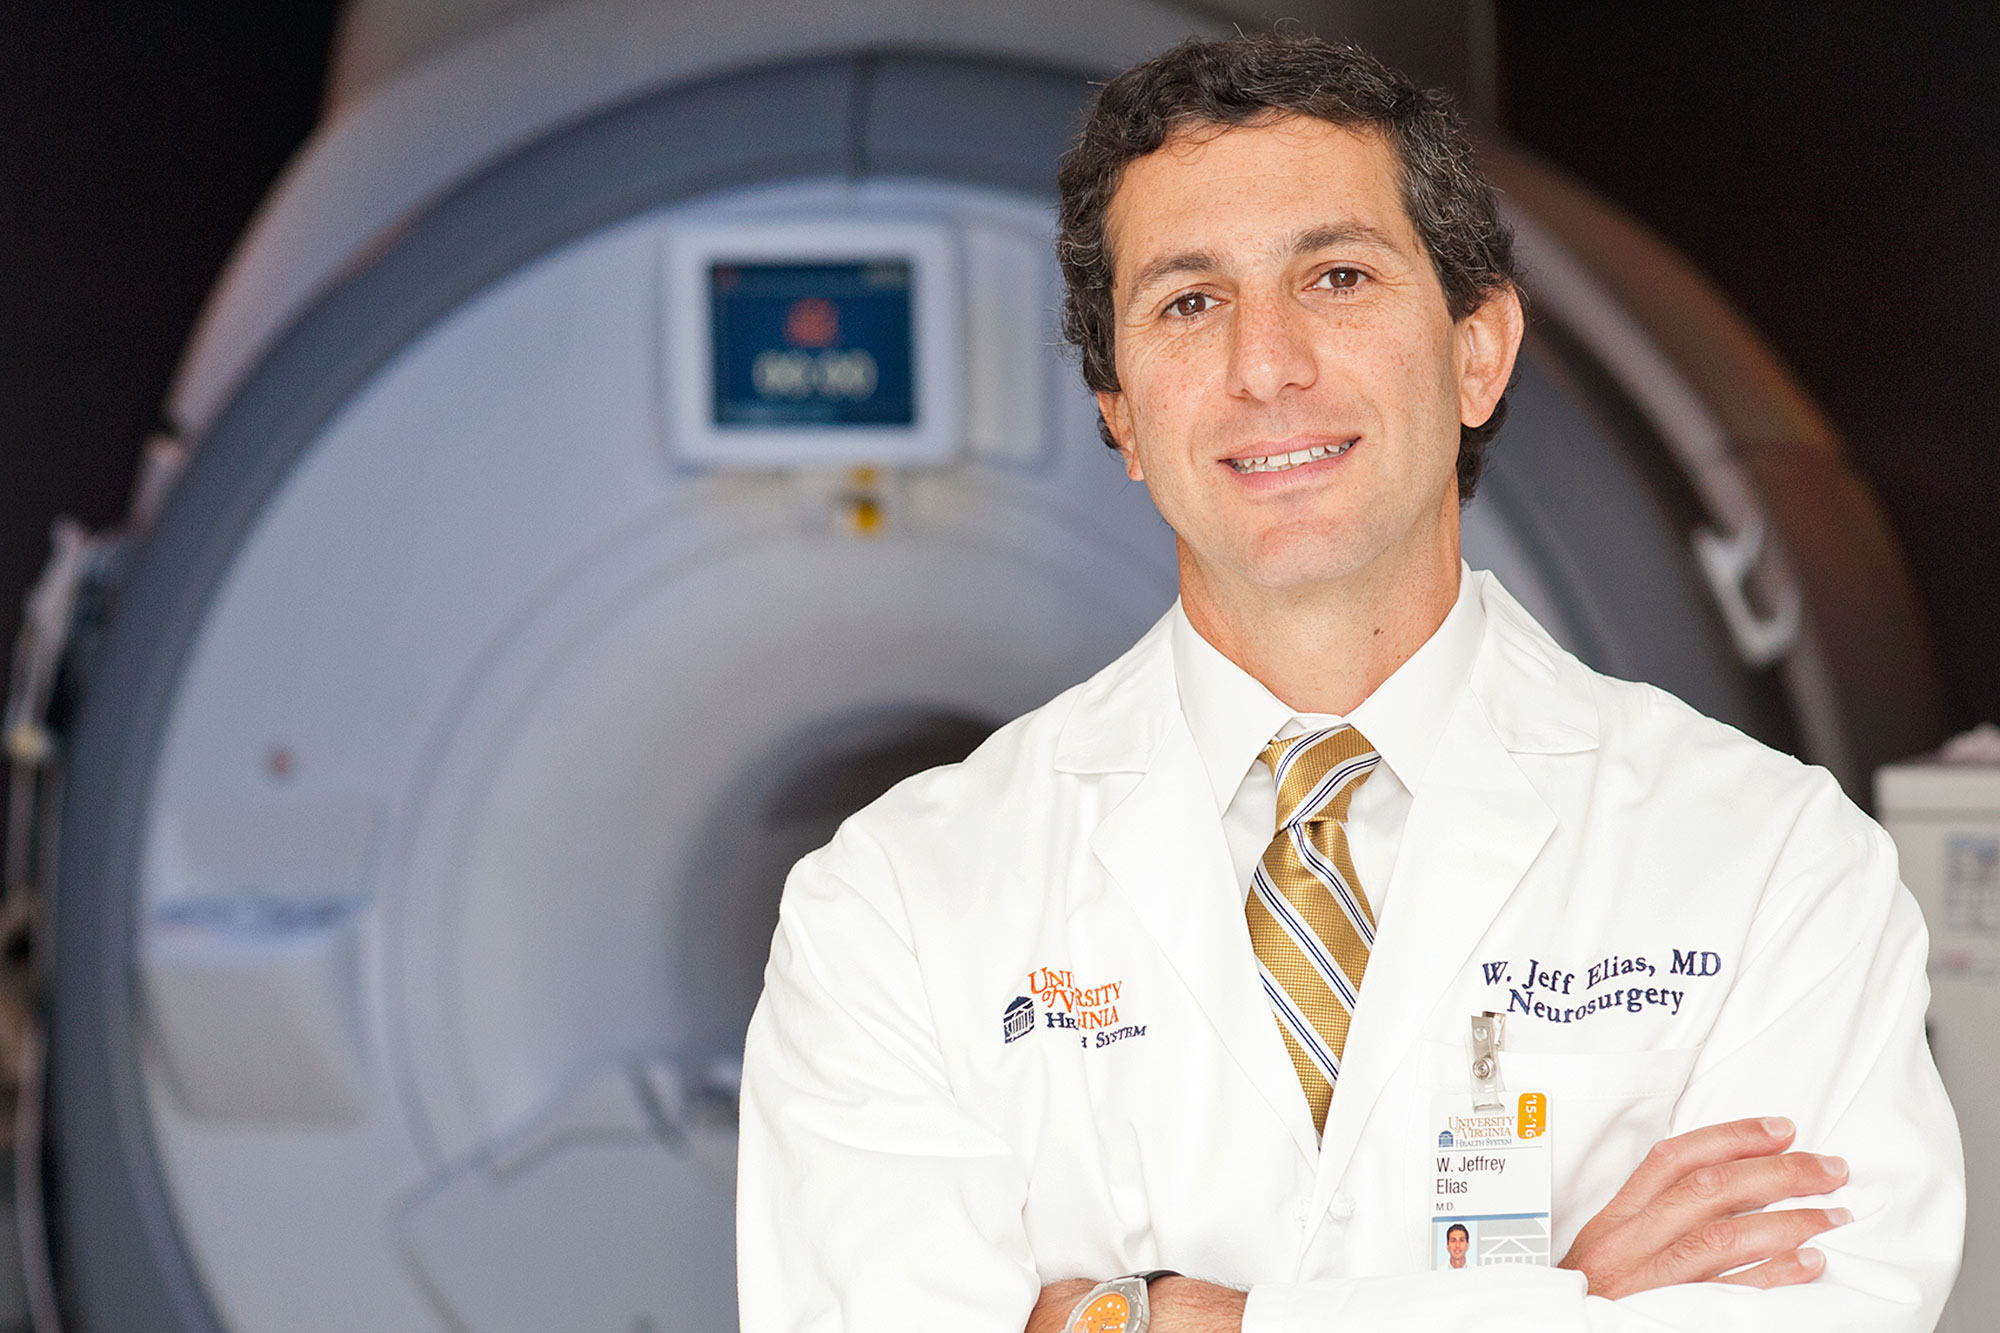 Dr. Jeff Elias, a professor of neurological surgery at UVA’s School of Medicine, said focused ultrasound may have many more uses in the future.